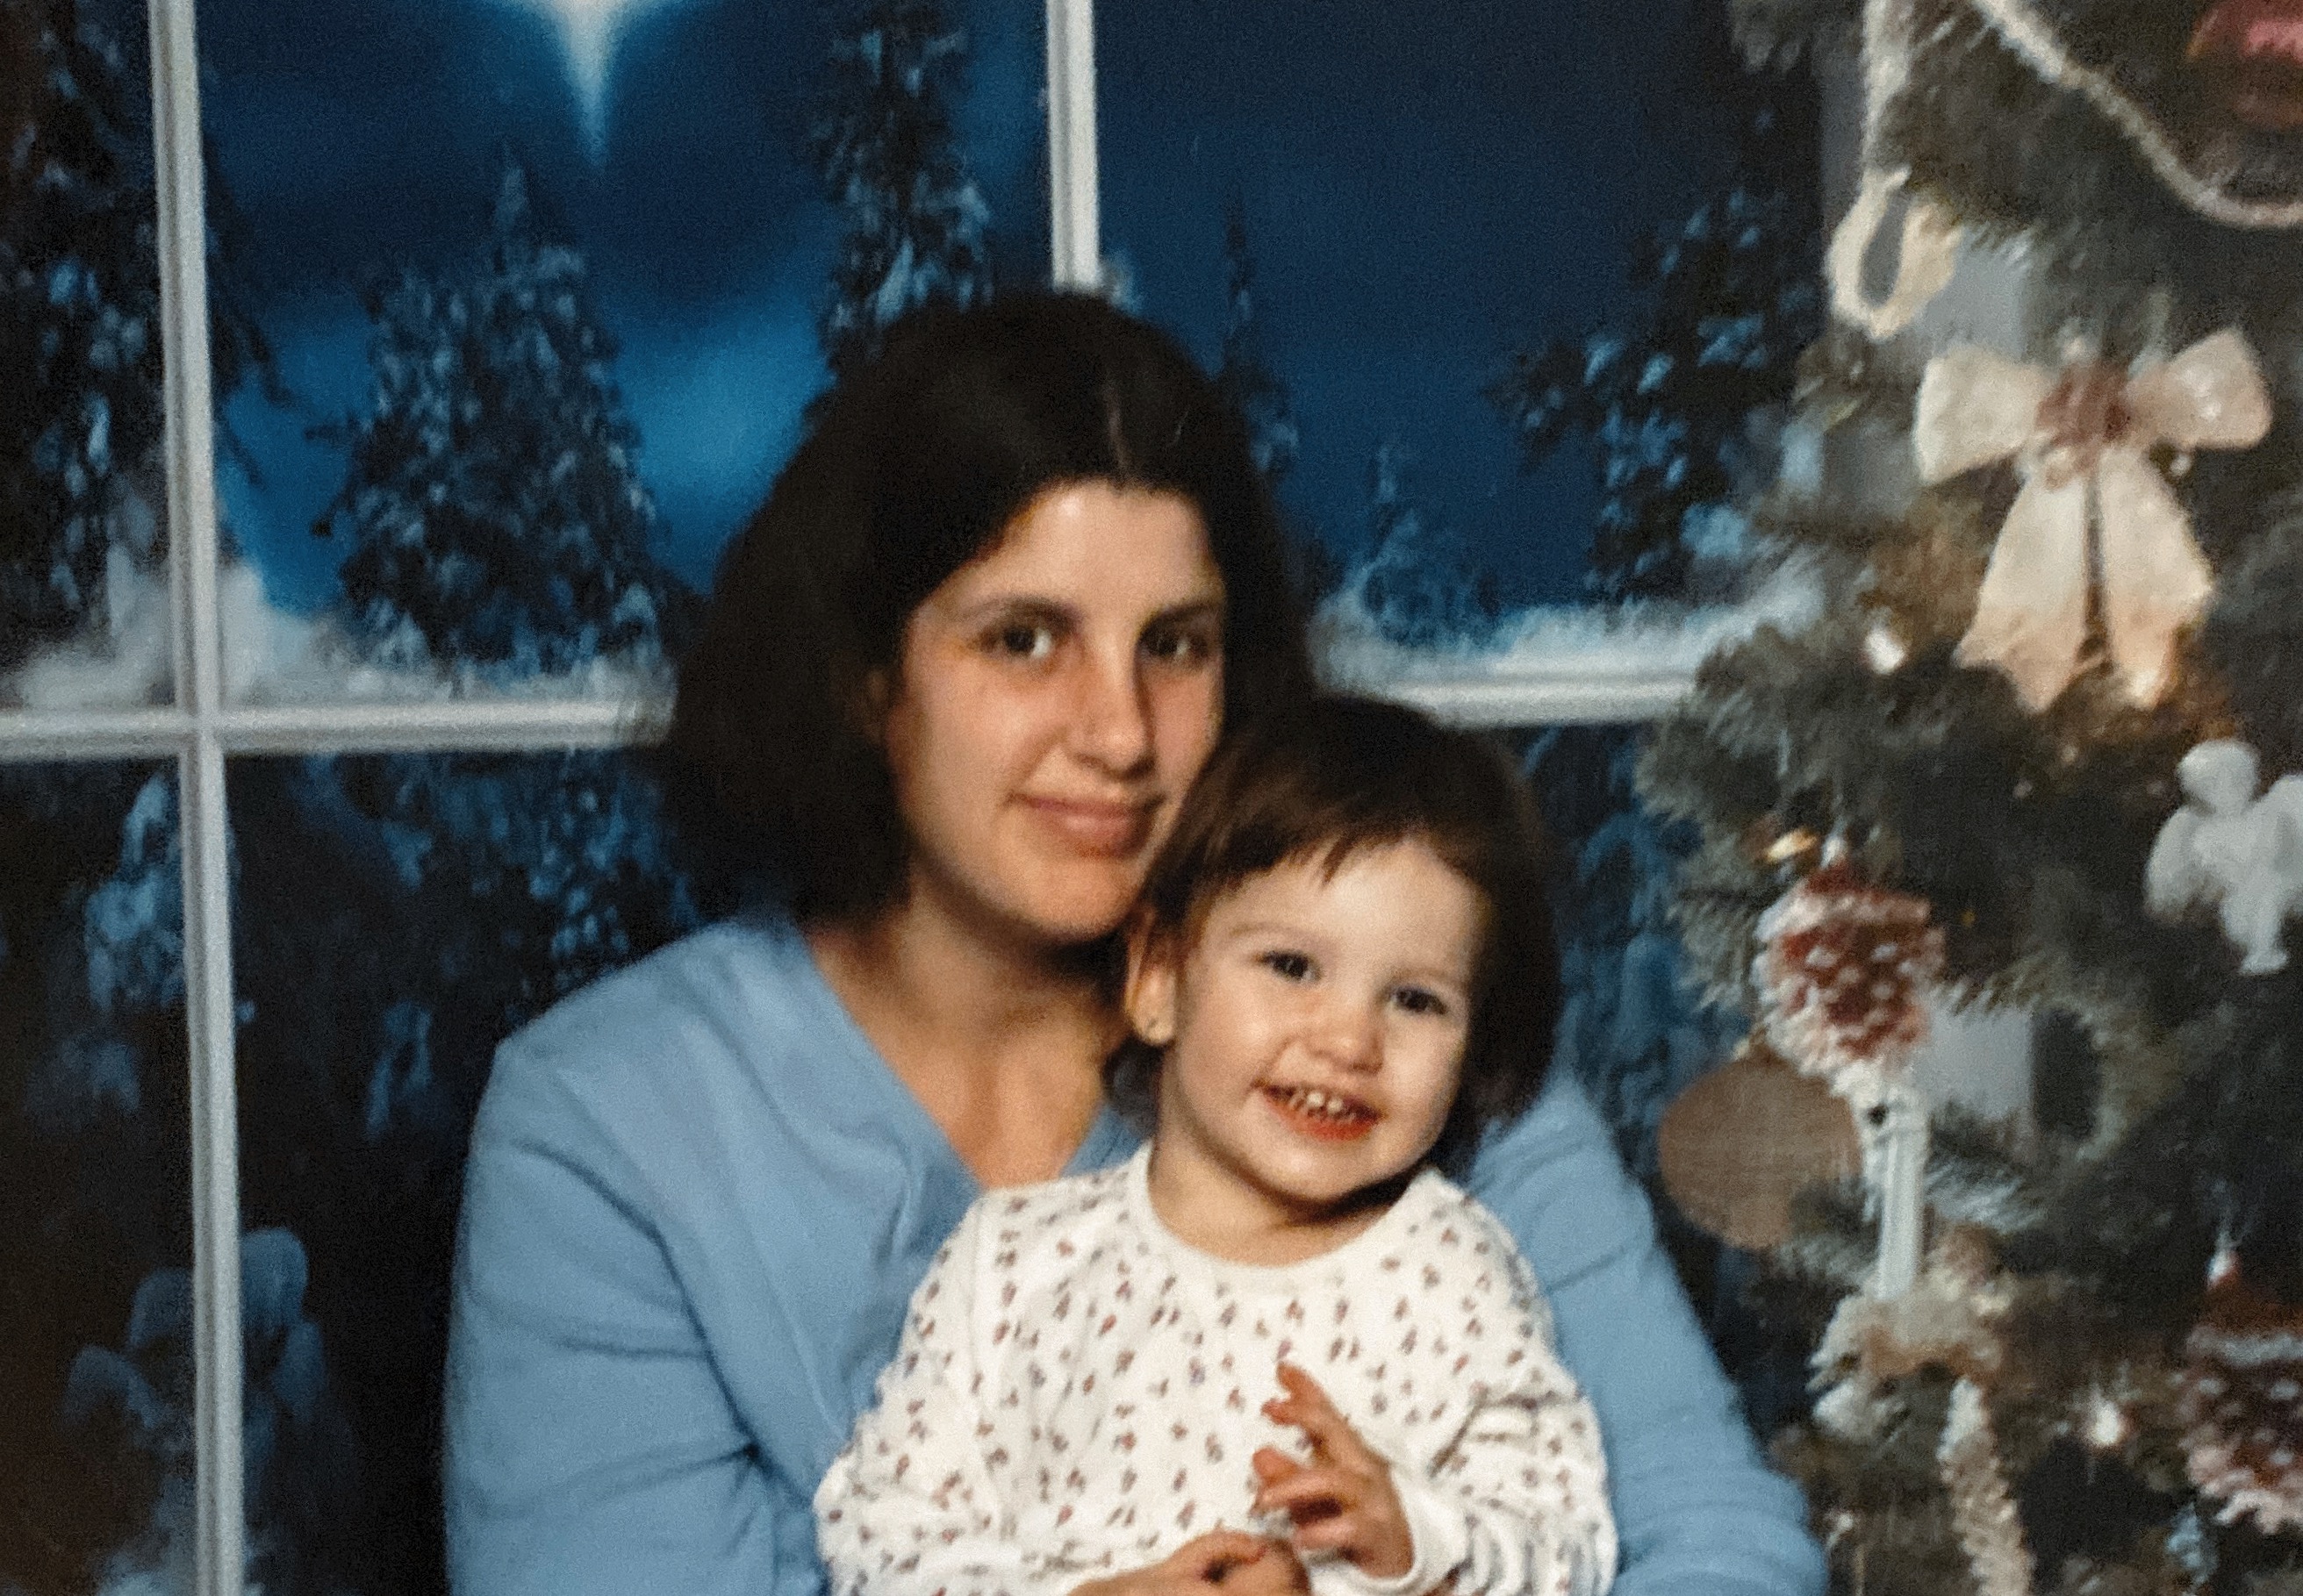 Mom22 and me 19 months